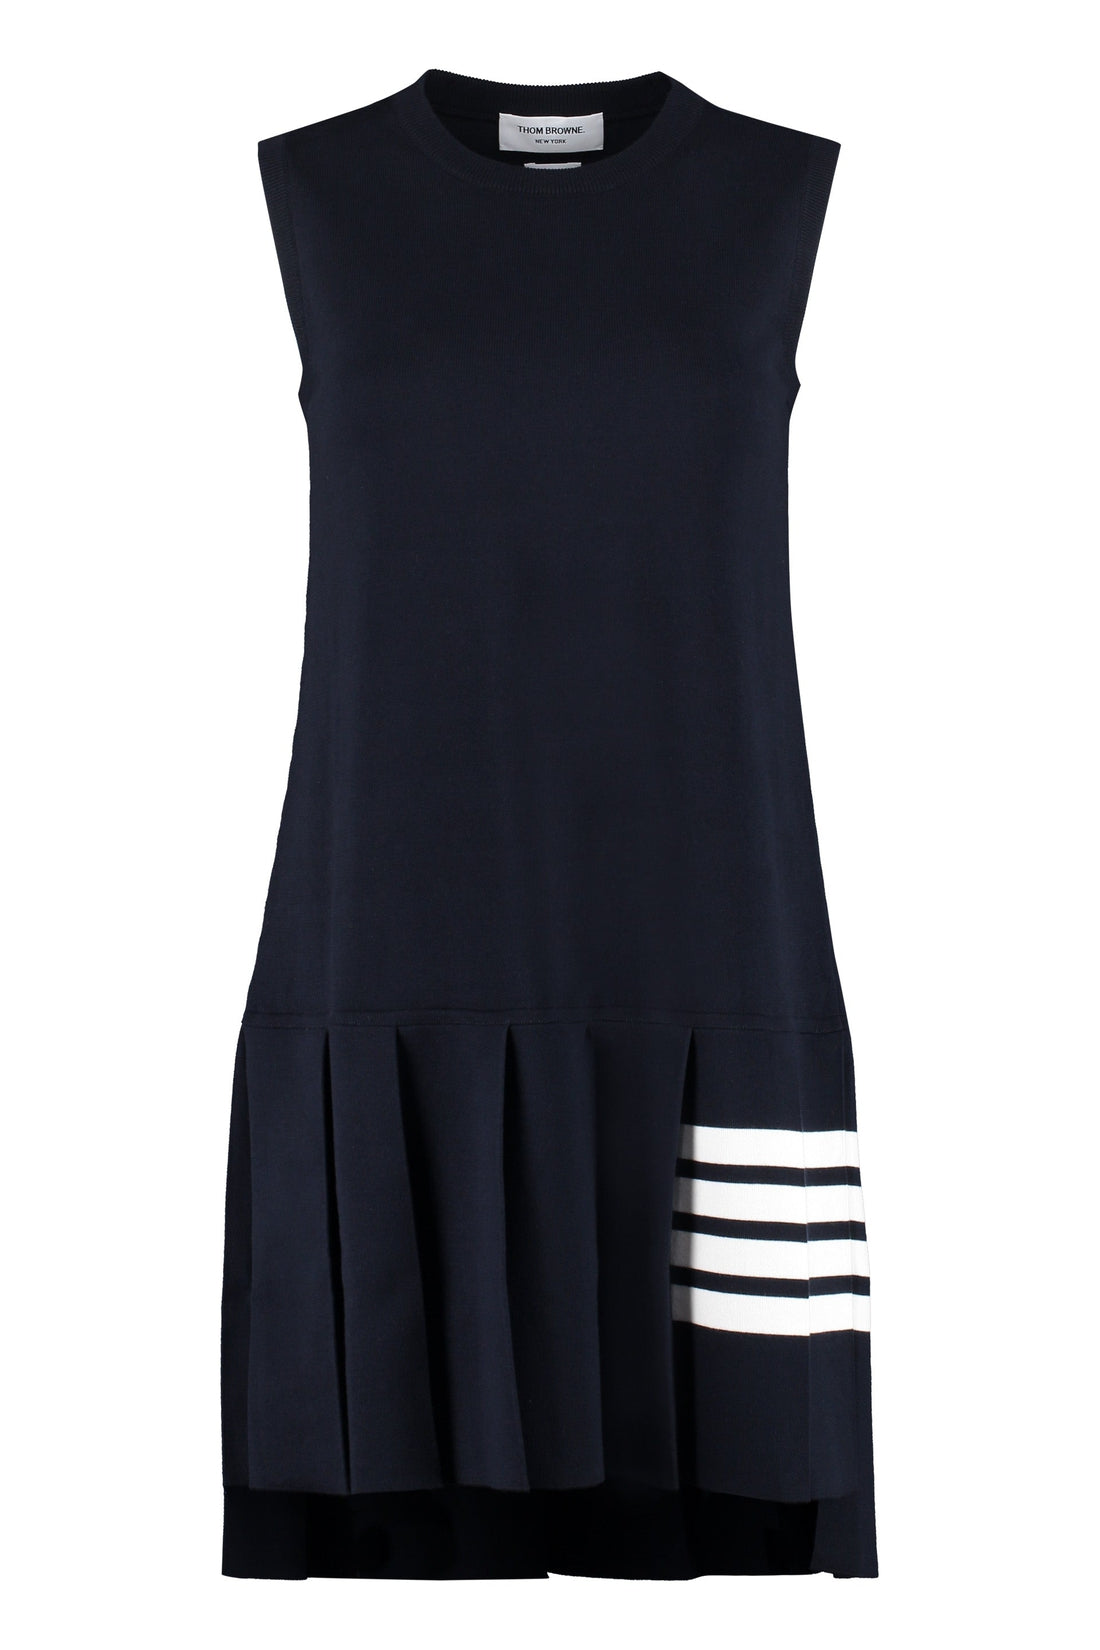 Thom Browne-OUTLET-SALE-Knitted sleeveless dress-ARCHIVIST